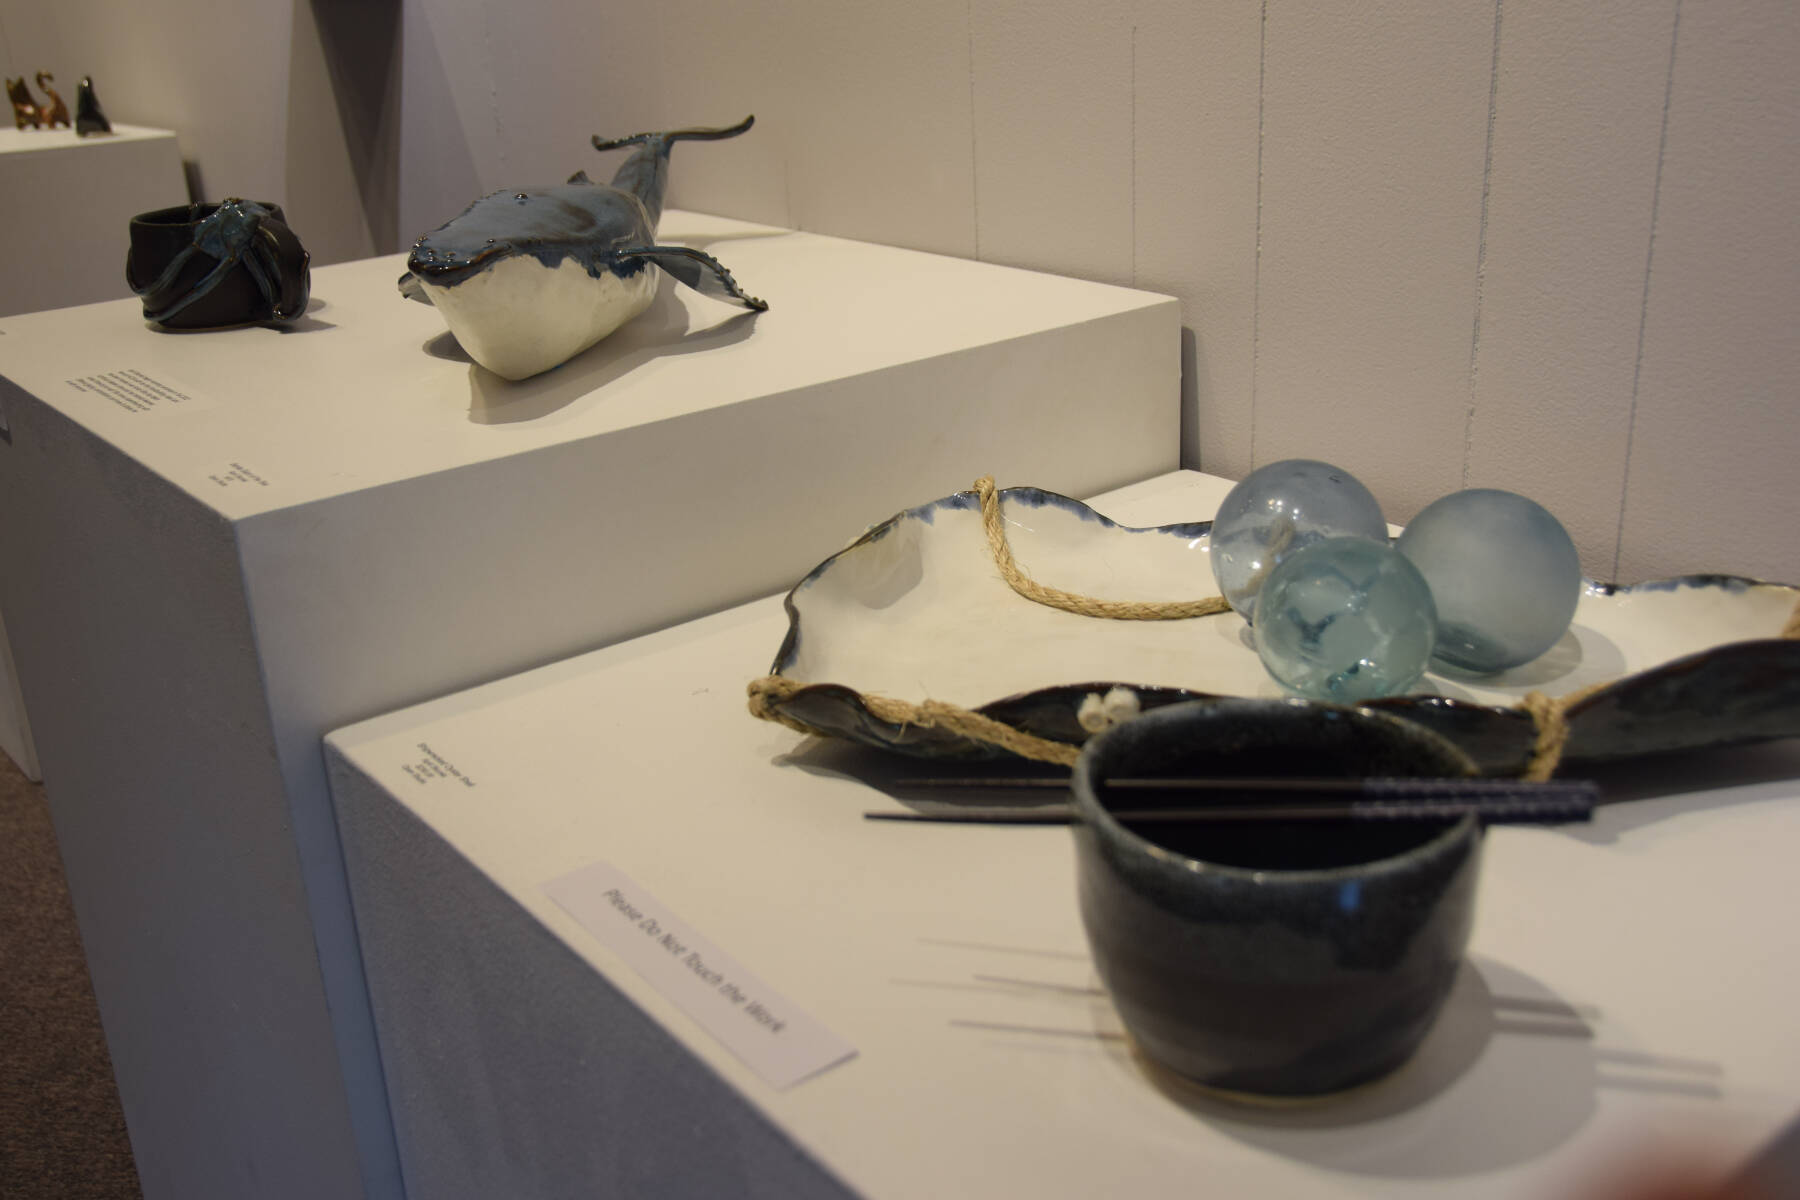 Work crafted by April Skorski in Homer Council on the Arts’ ceramics open studio is on display at HCOA’s First Friday showcase on Sept. 1 in Homer, Alaska. (Delcenia Cosman/Homer News)